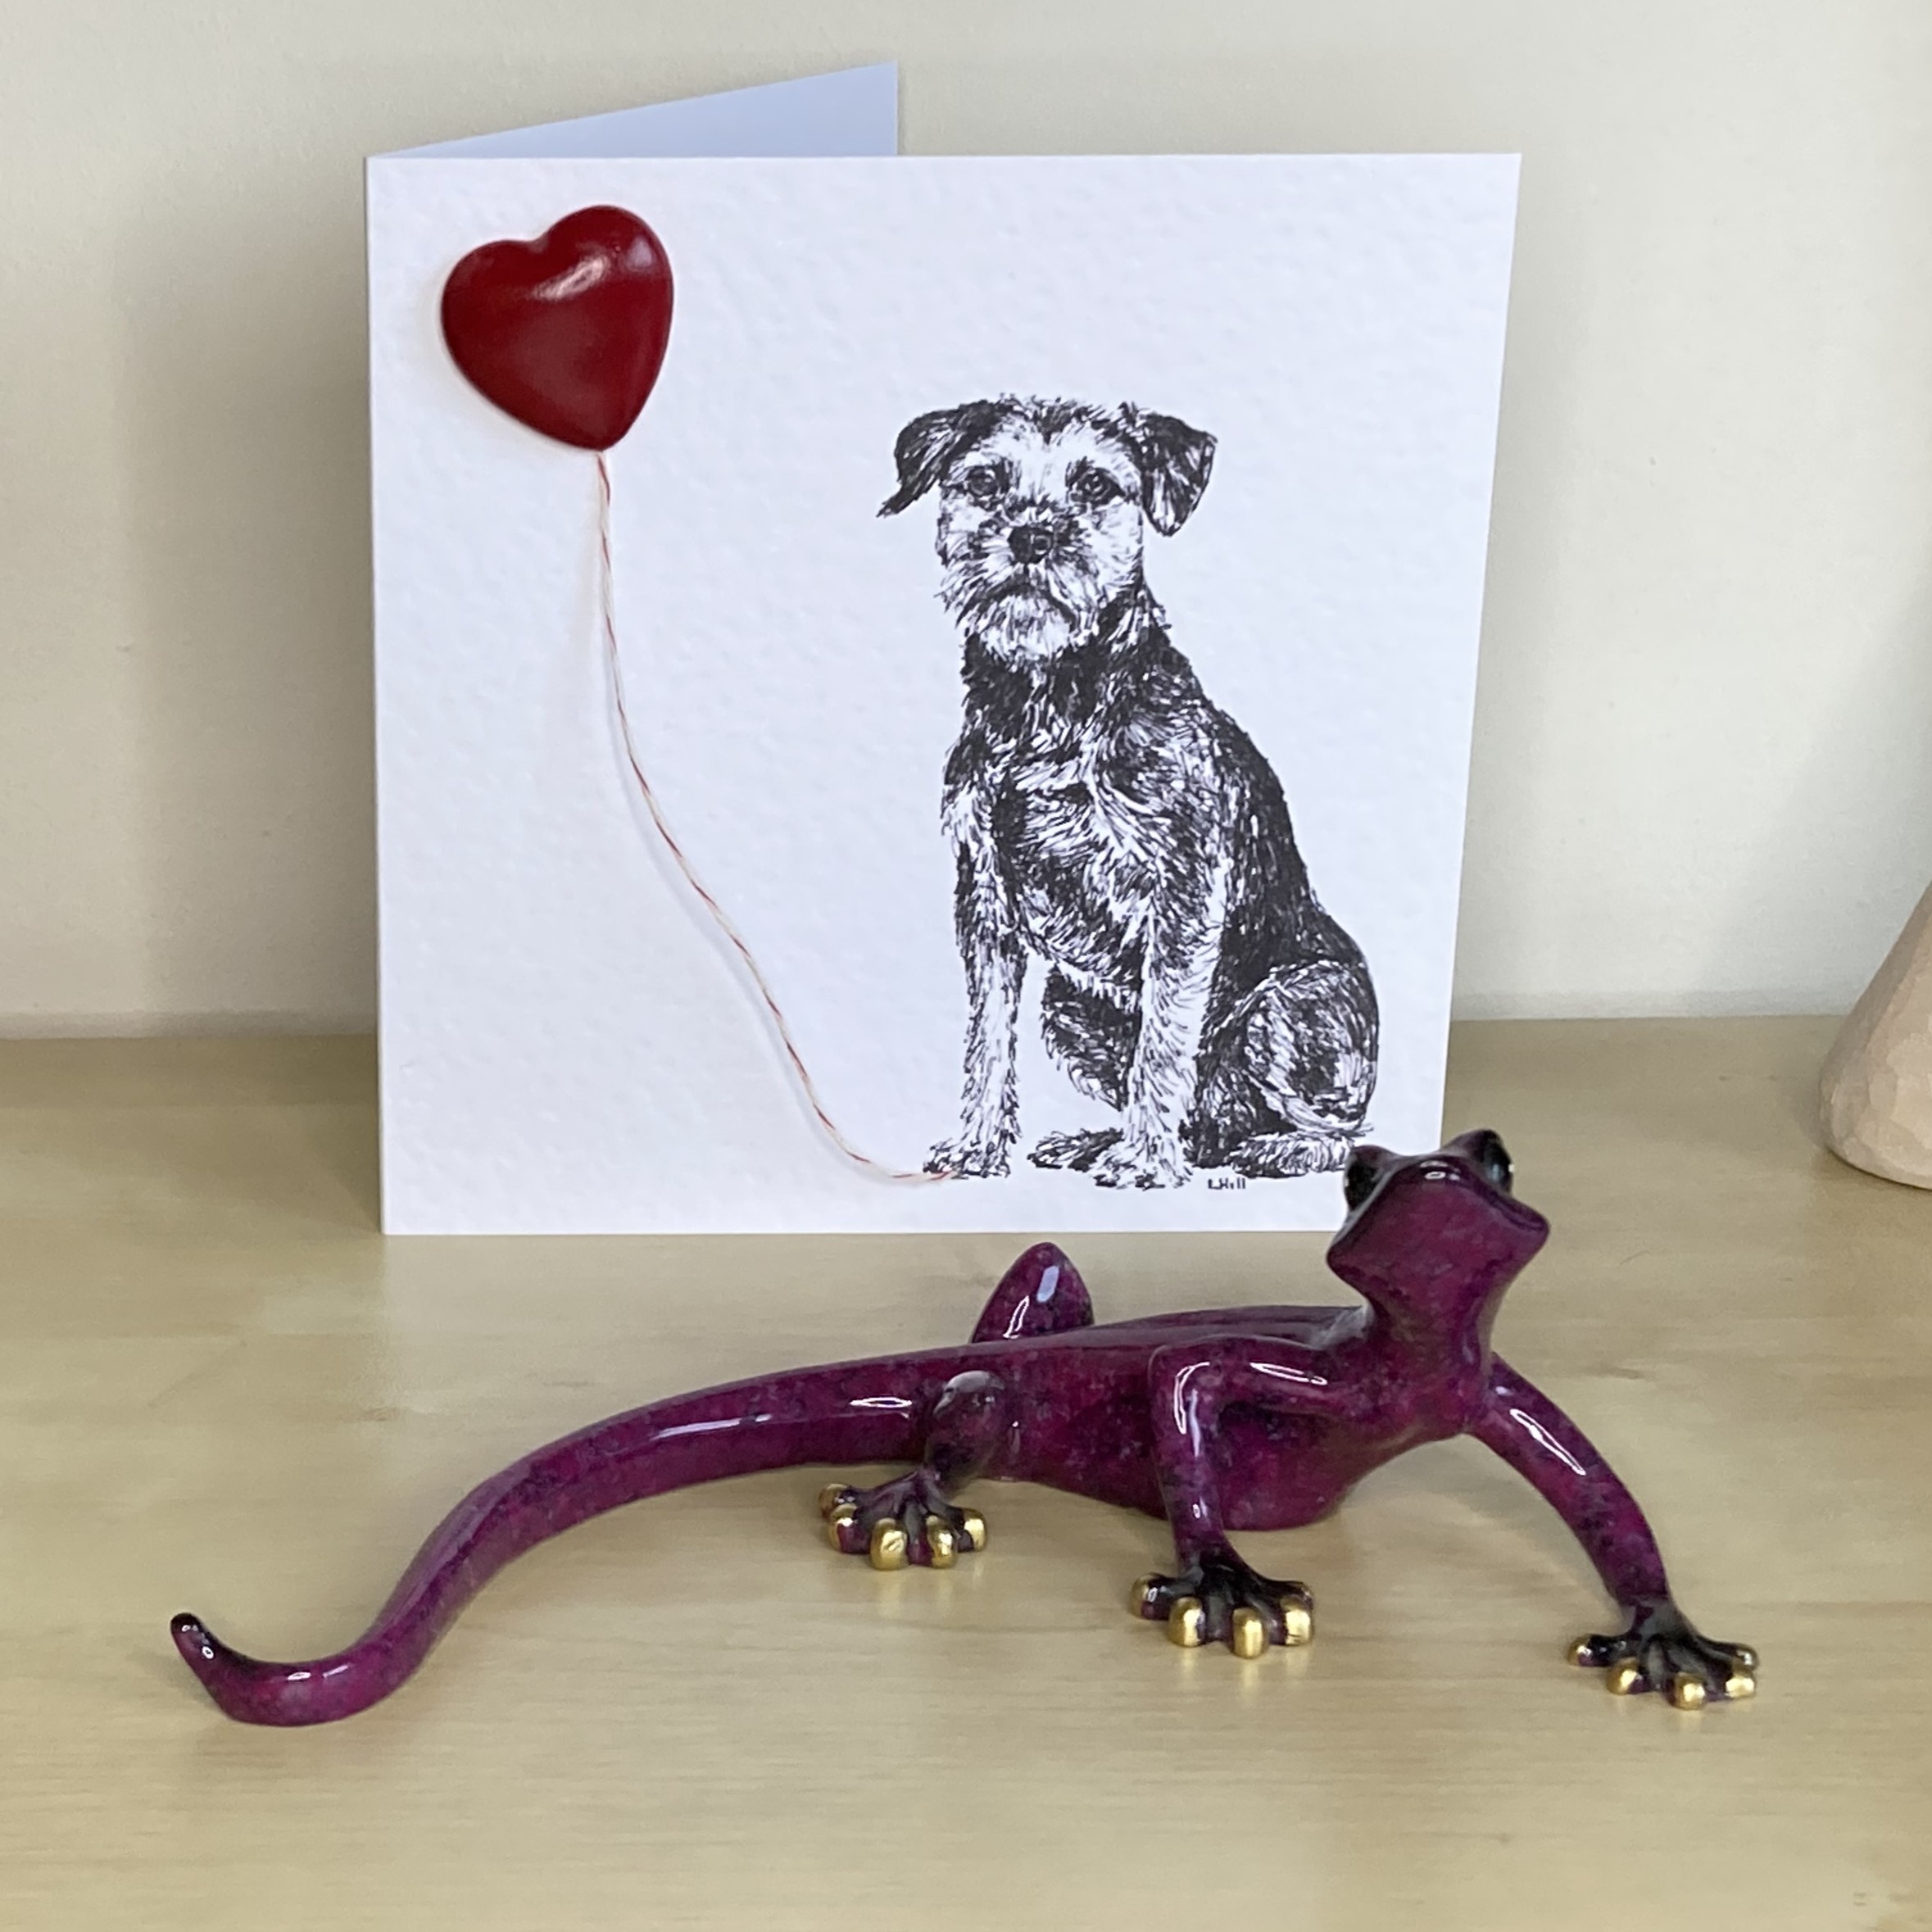 Border Terrier 15cm greetings card with 3D red heart balloon